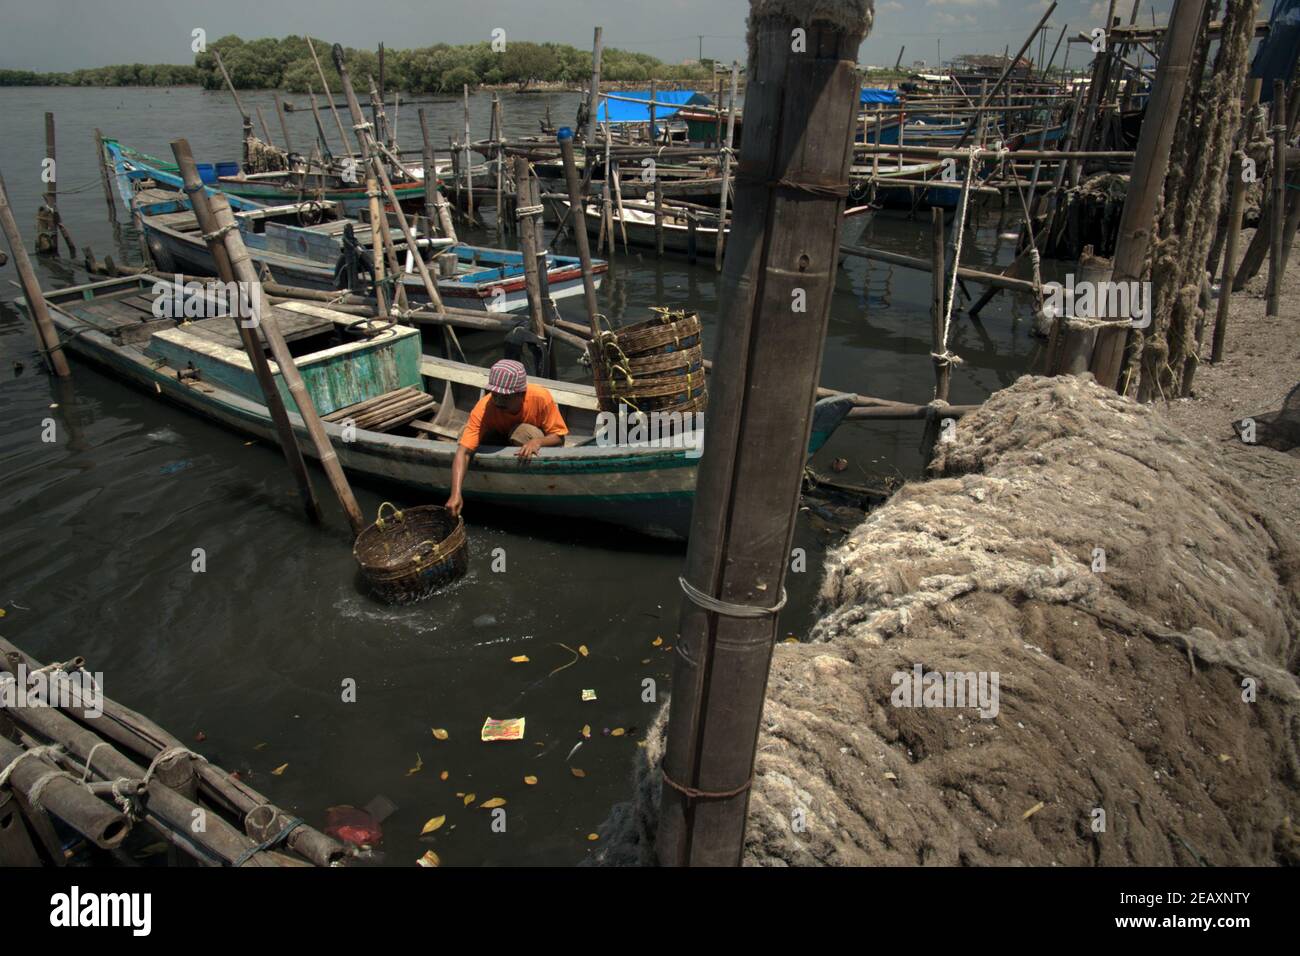 A worker washing rattan baskets on sea water from a boat tied to the landing beach of Kamal Muara, a fishing village also known as a green mussel production center in the coastal area of Jakarta, Indonesia. Stock Photo